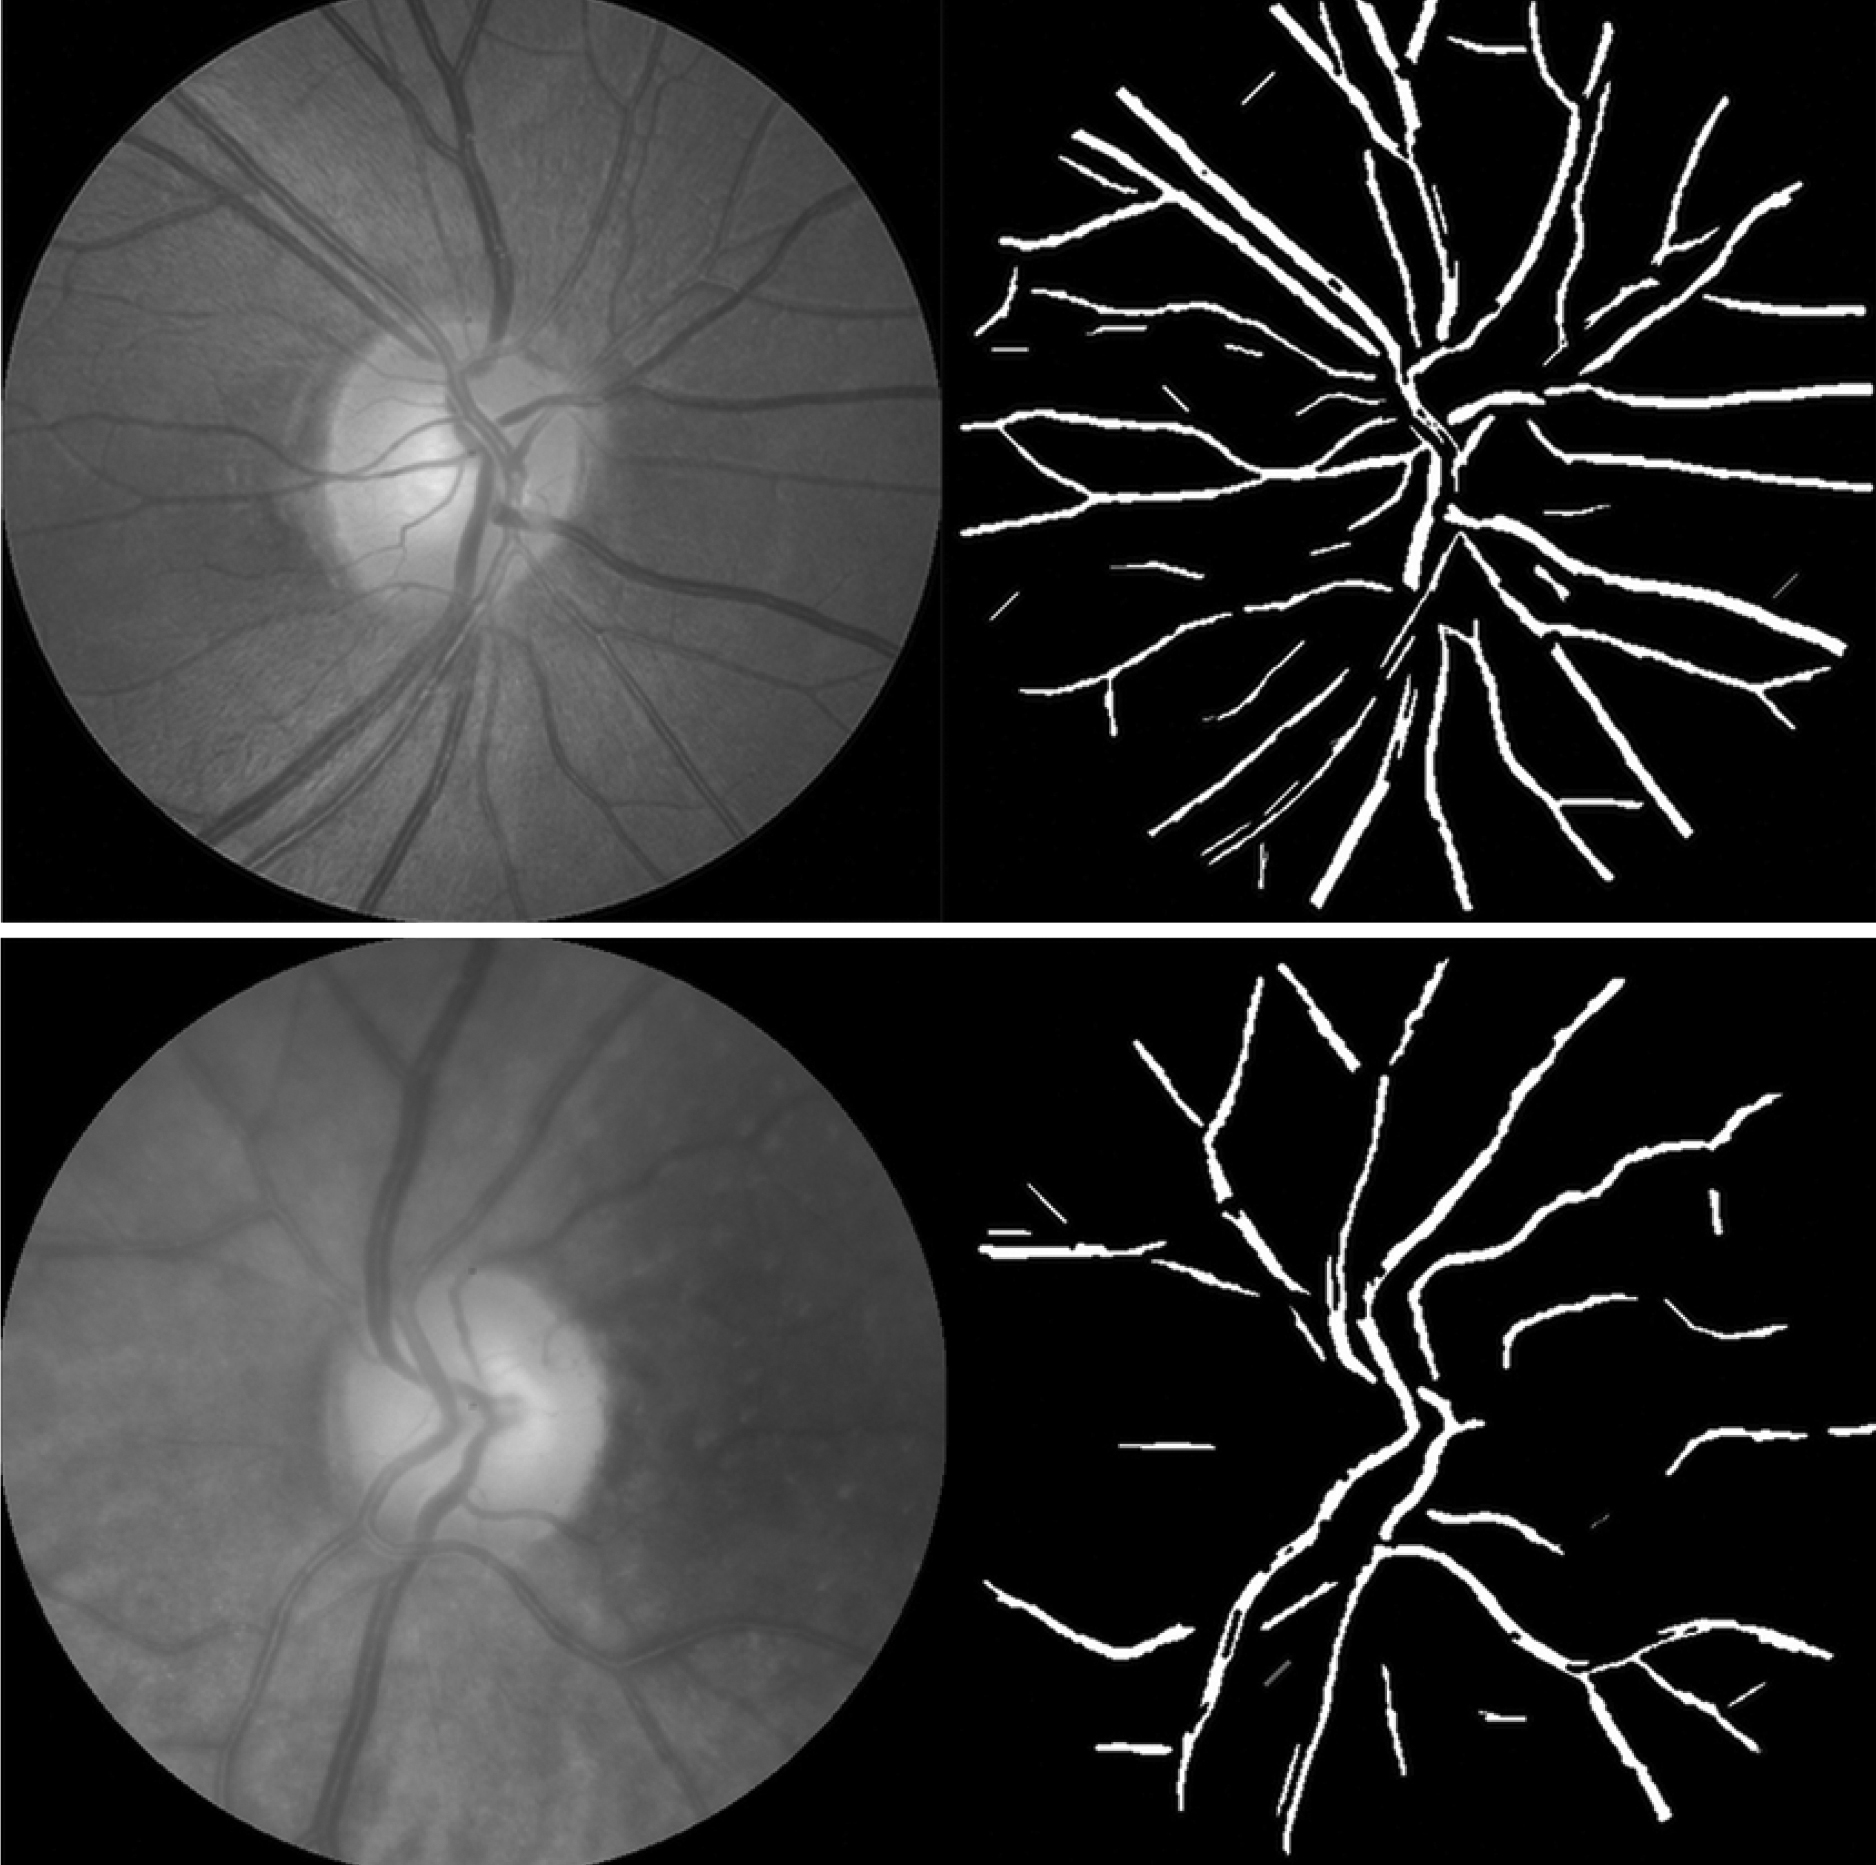 A metric called retinal fractal dimension, relating to the complexity of the retinal vasculature, may have a future role in screenings for systemic diseases. These photos show patients with high (top image) and low (bottom image) fractal dimension.